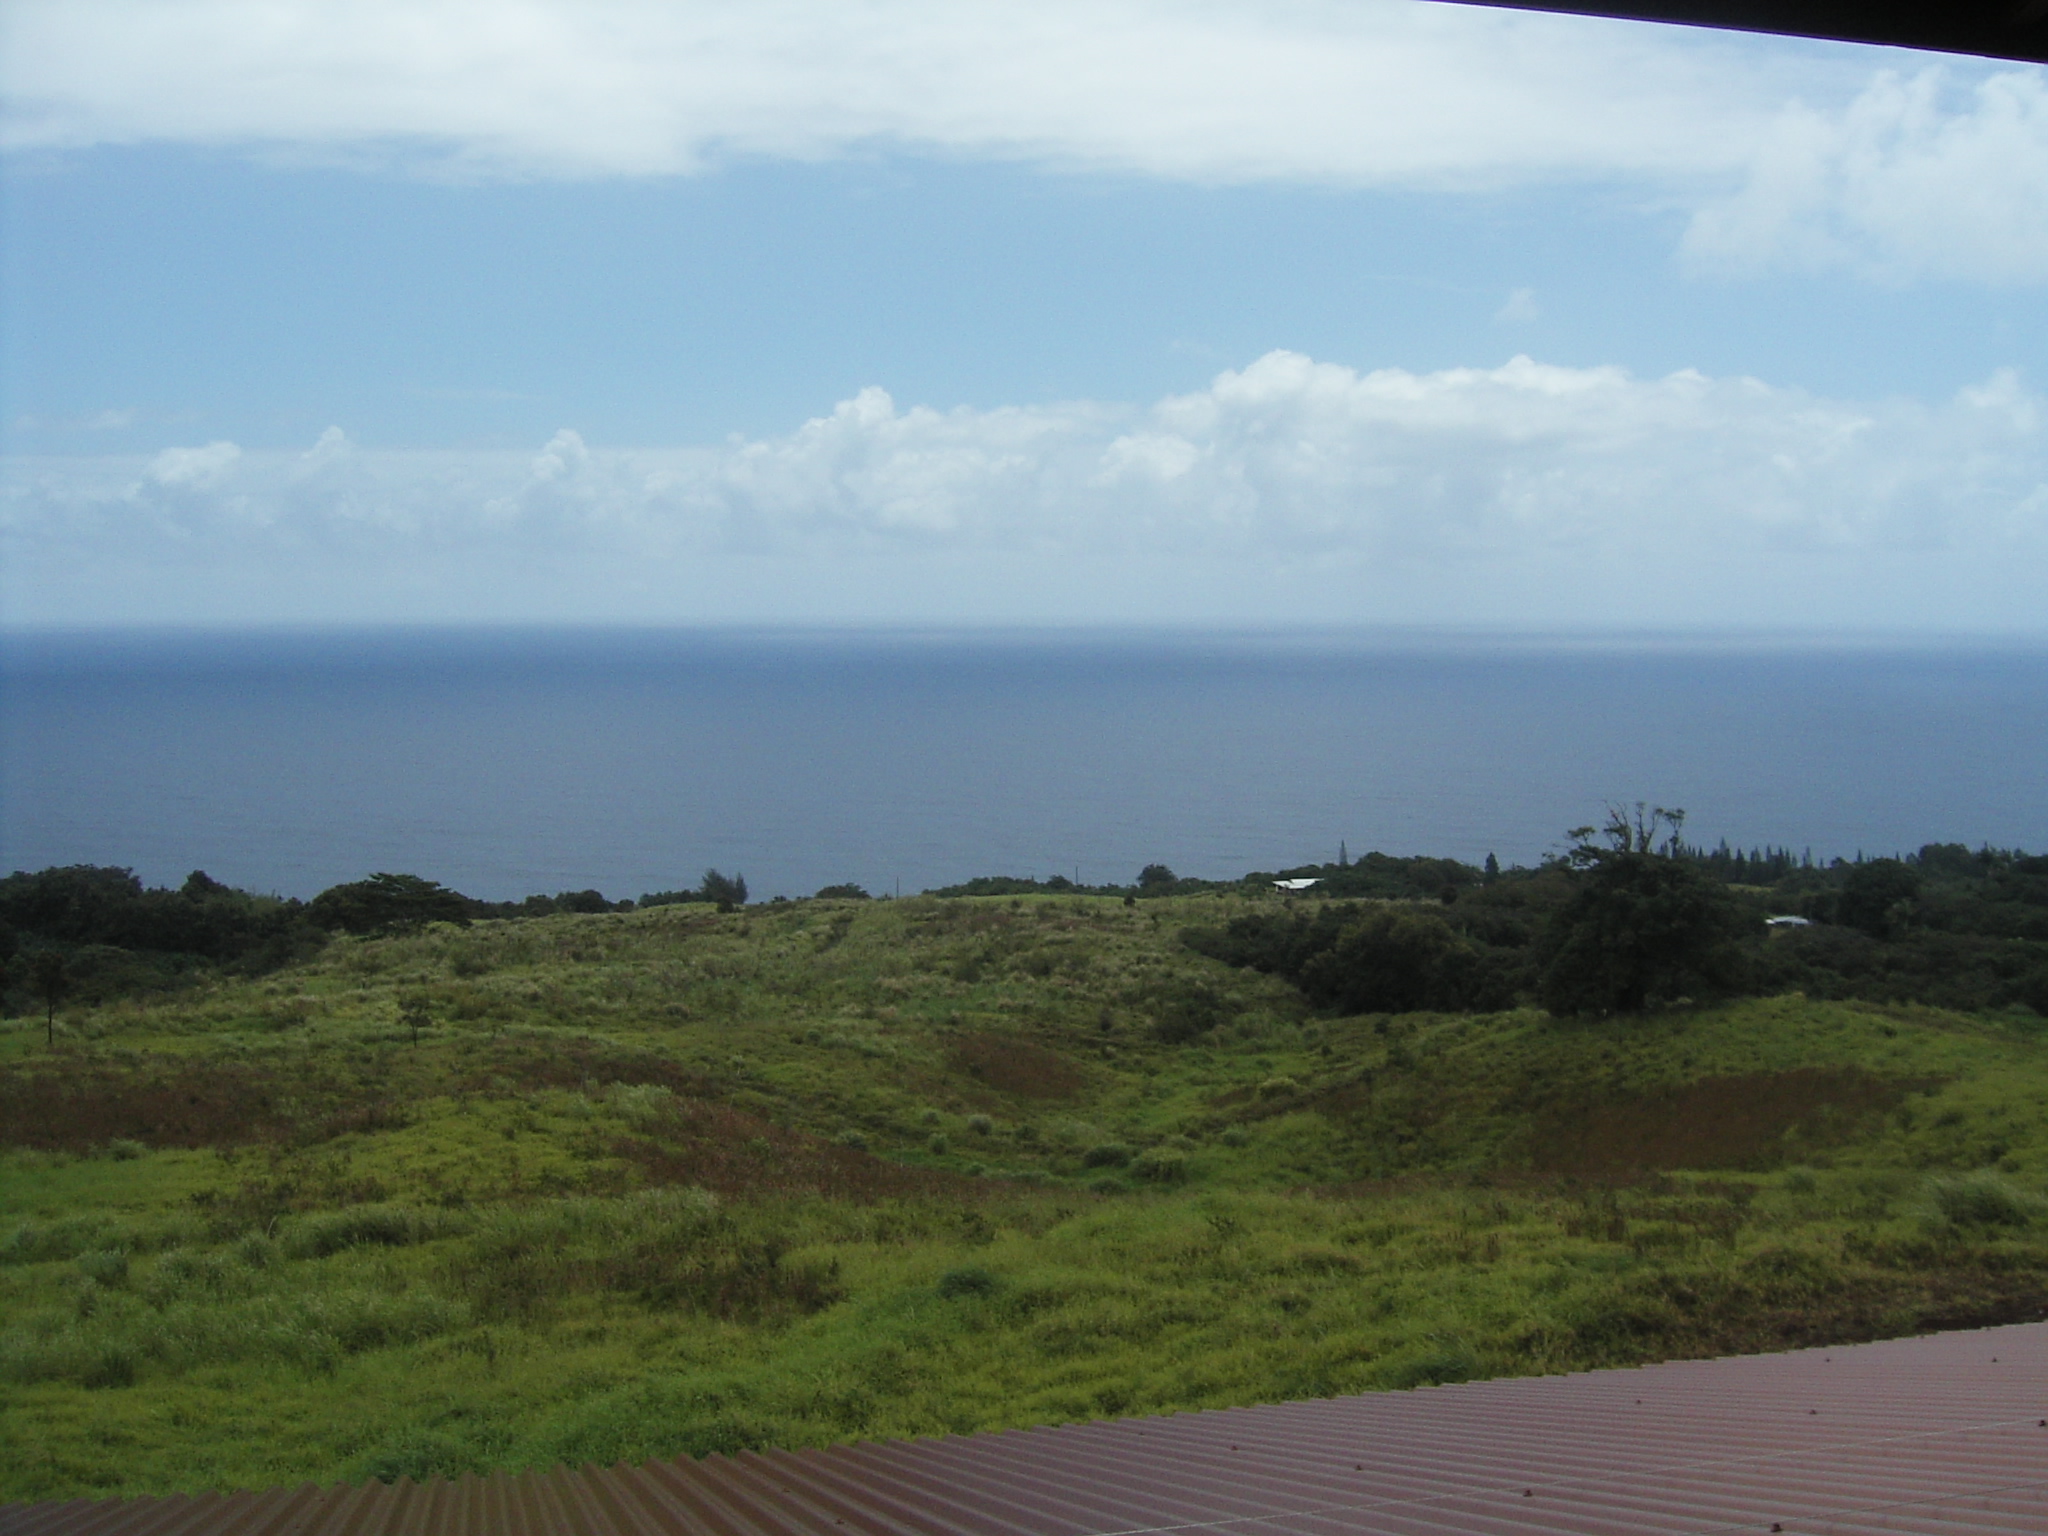 The view of the ocean from the upper story